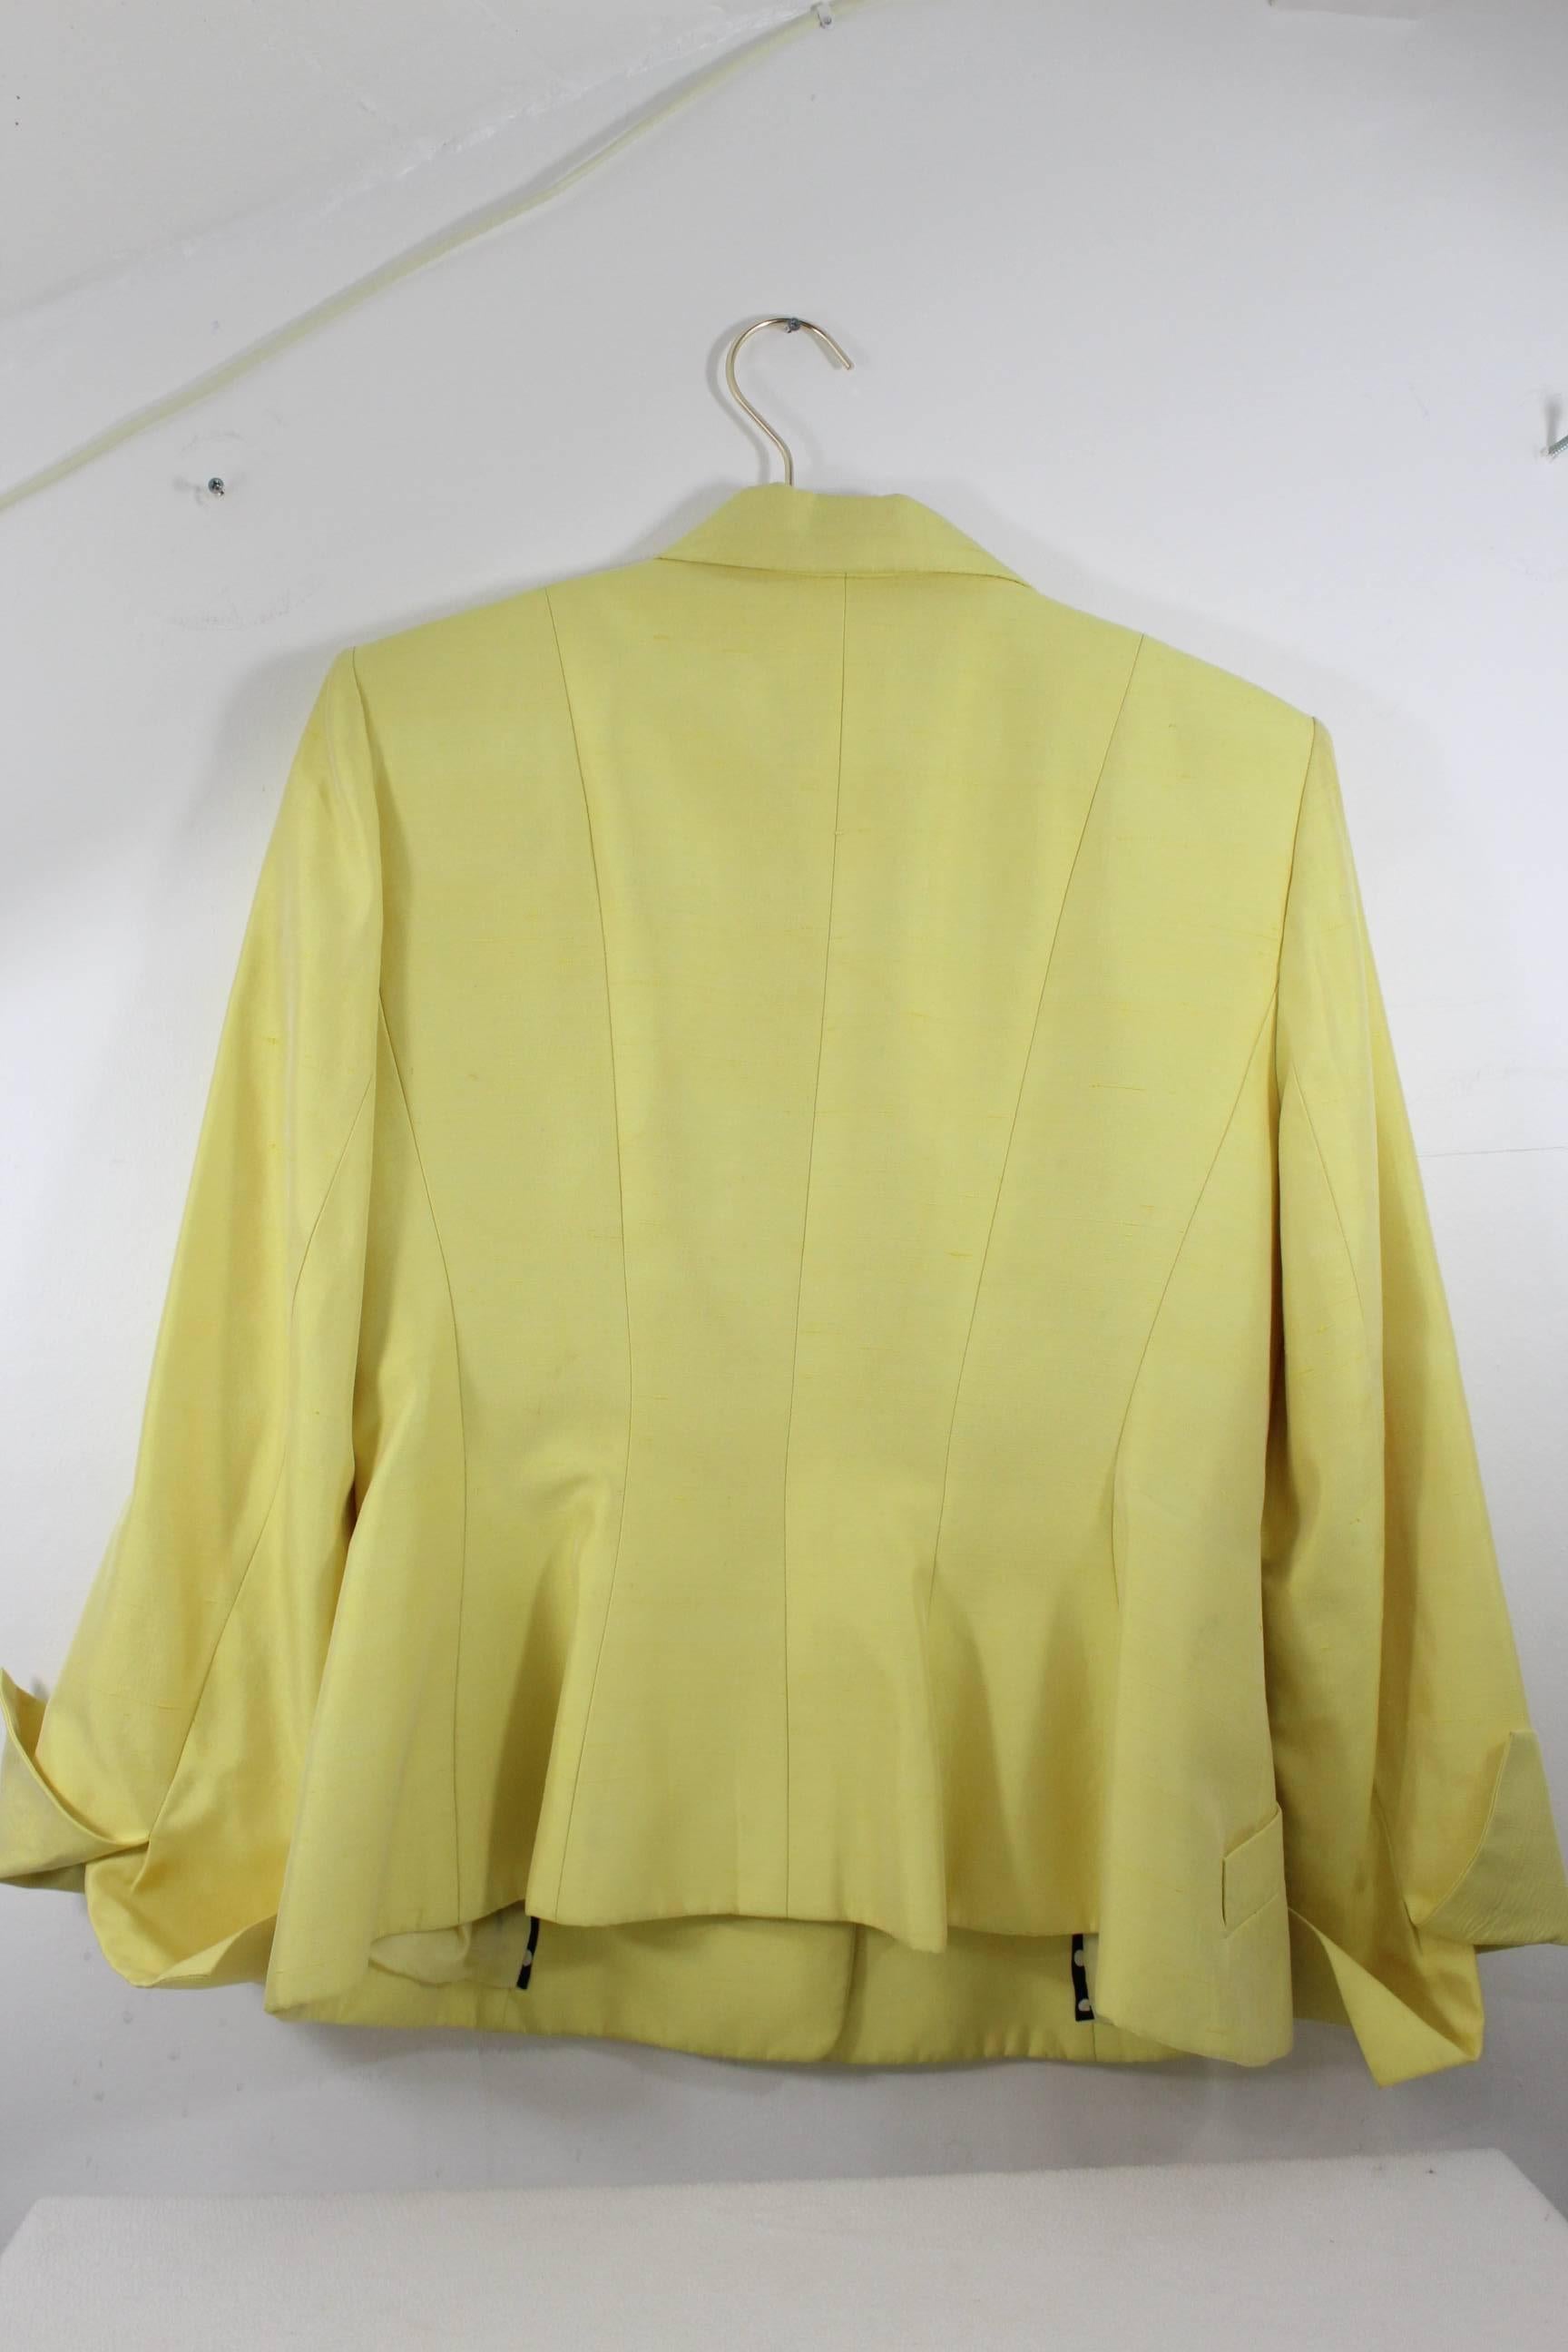 Really nice and fresh jacket from Dior in wild silk.

16 inches from shoulder to shoulder

Silver and yellow buttons.

Good condition, just a 2 small stains in the back ( hardly noticeable, check images)
Really nice color.